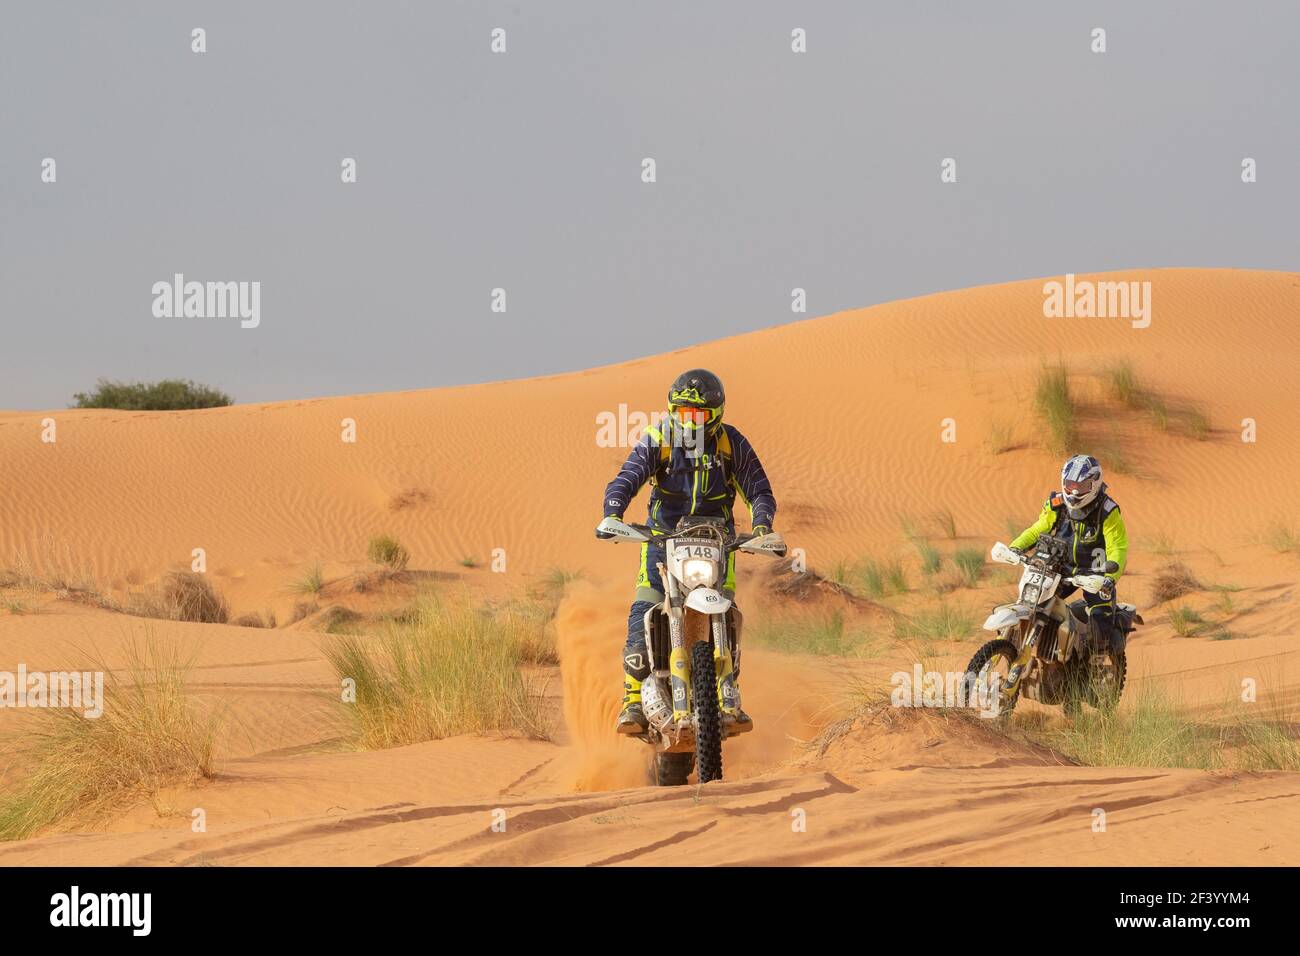 148 HAMARD Stephane (FRA), Reunion Union Rallye Raid, Husqvarna 250 TEI, Enduro Cup, action during Rally of Morocco 2018, Stage 2, Erfoud to Erfoud, october 6 - Photo Frederic Le Floc'h / DPPI Stock Photo